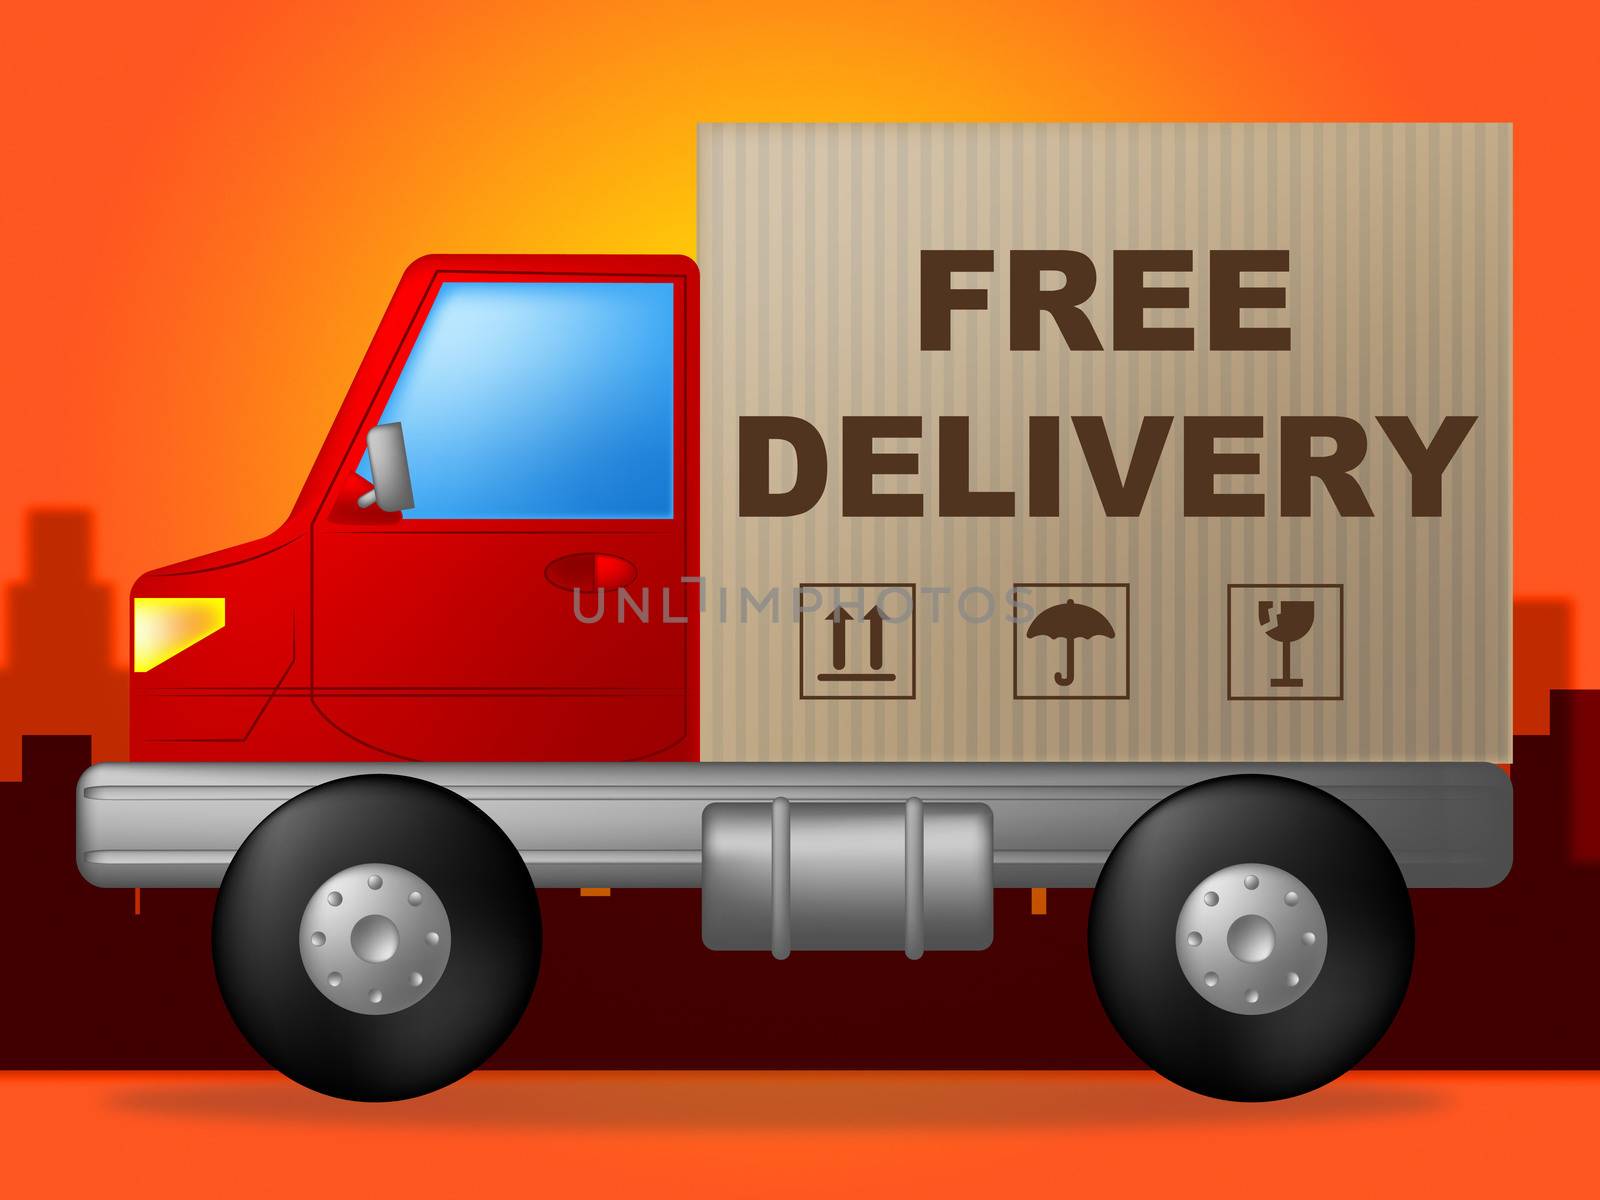 Free Delivery Represents With Our Compliments And Delivering by stuartmiles